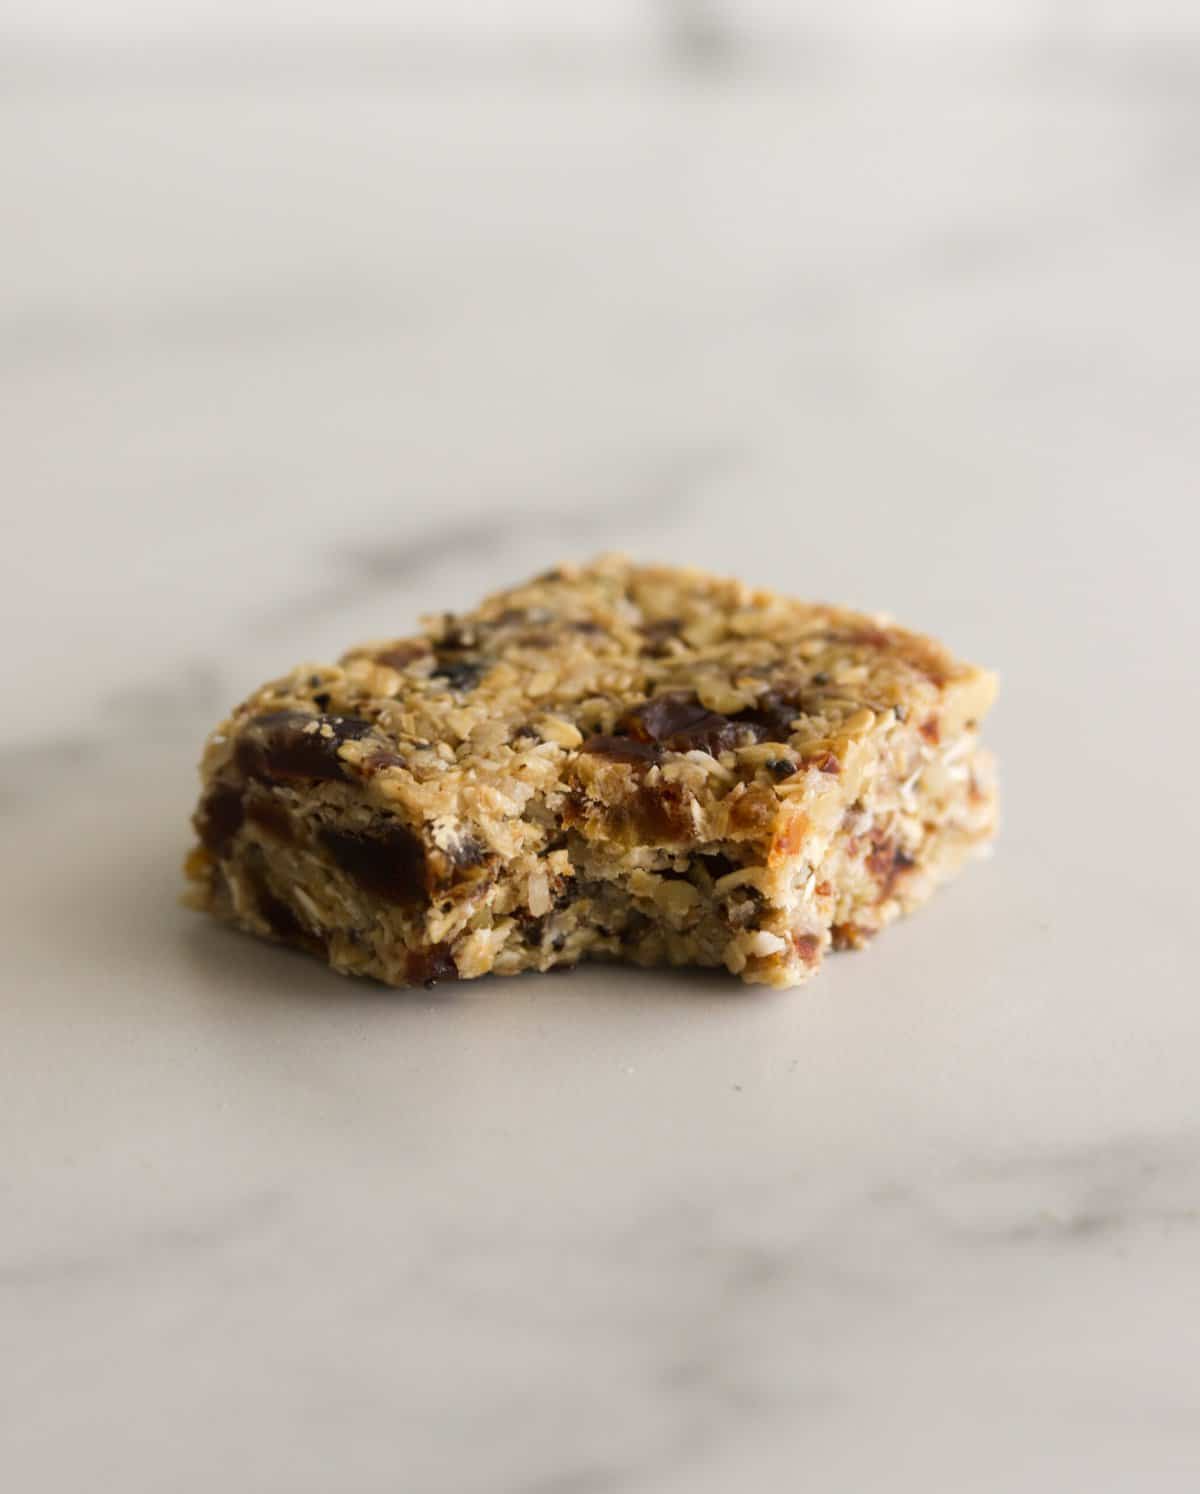 A side shot of a raw oat bar with a bite out of it.